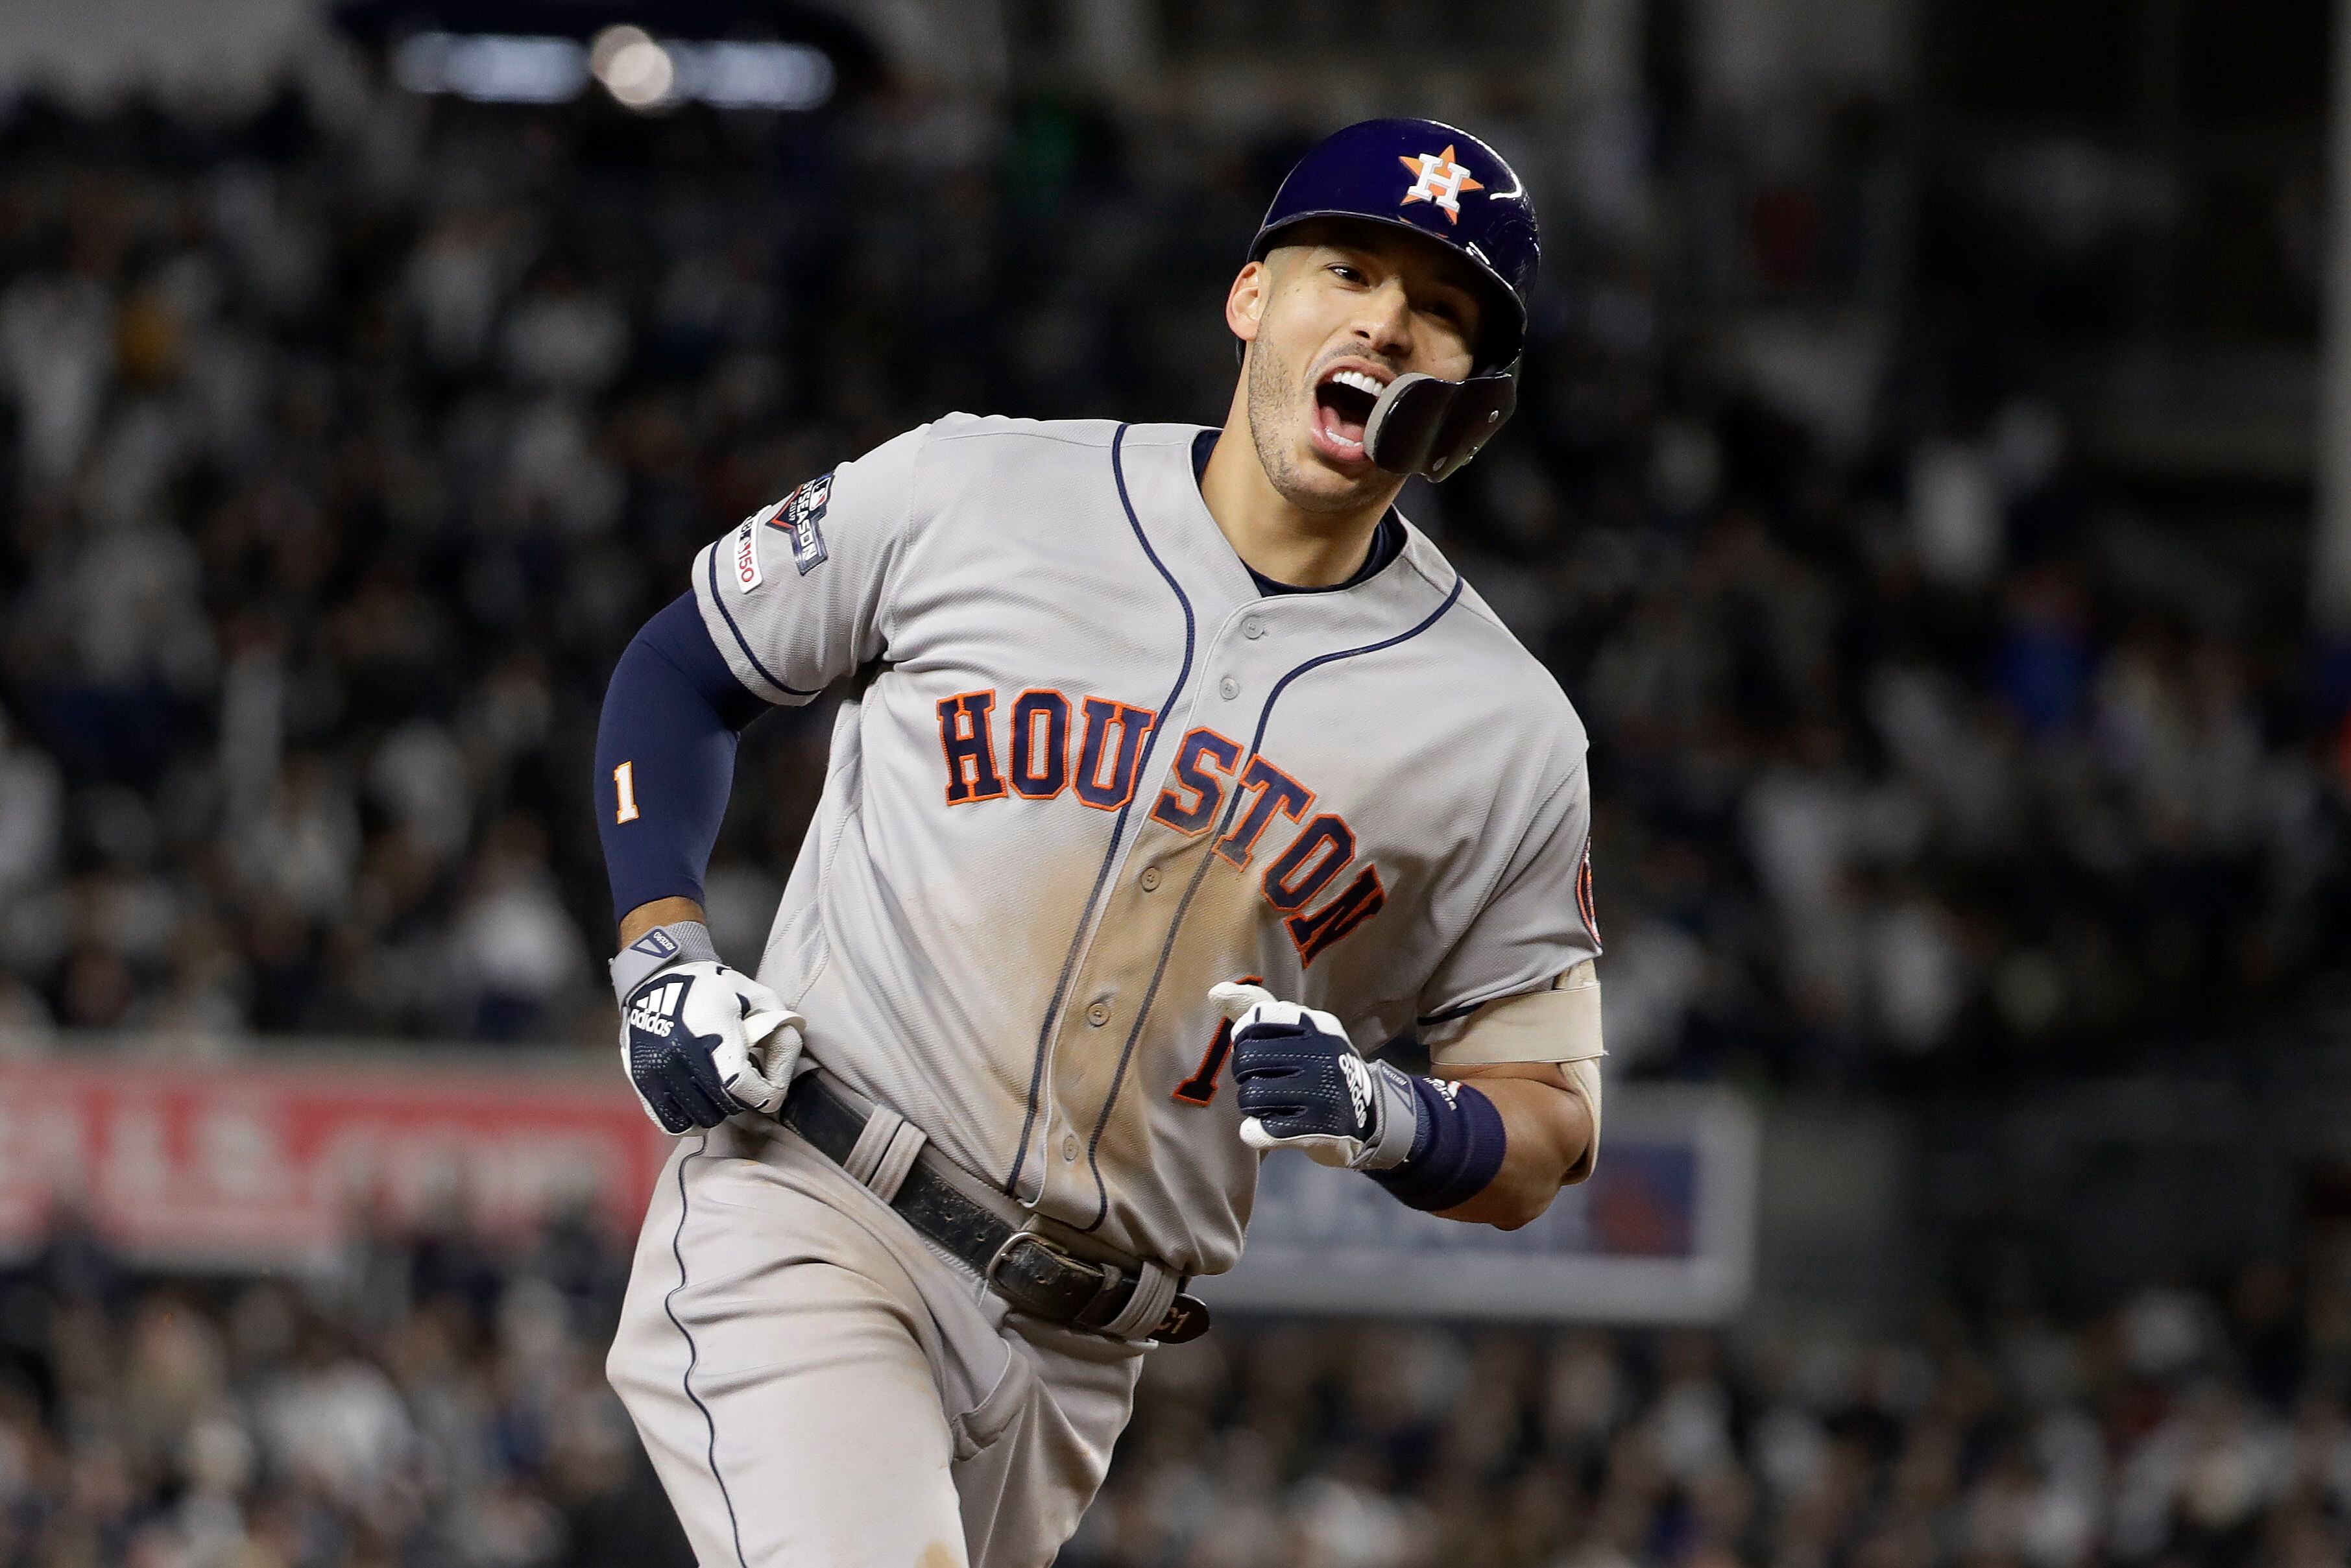 He has the highest standard of excellence': Inside Carlos Correa's efforts  to build a winning culture with the Twins